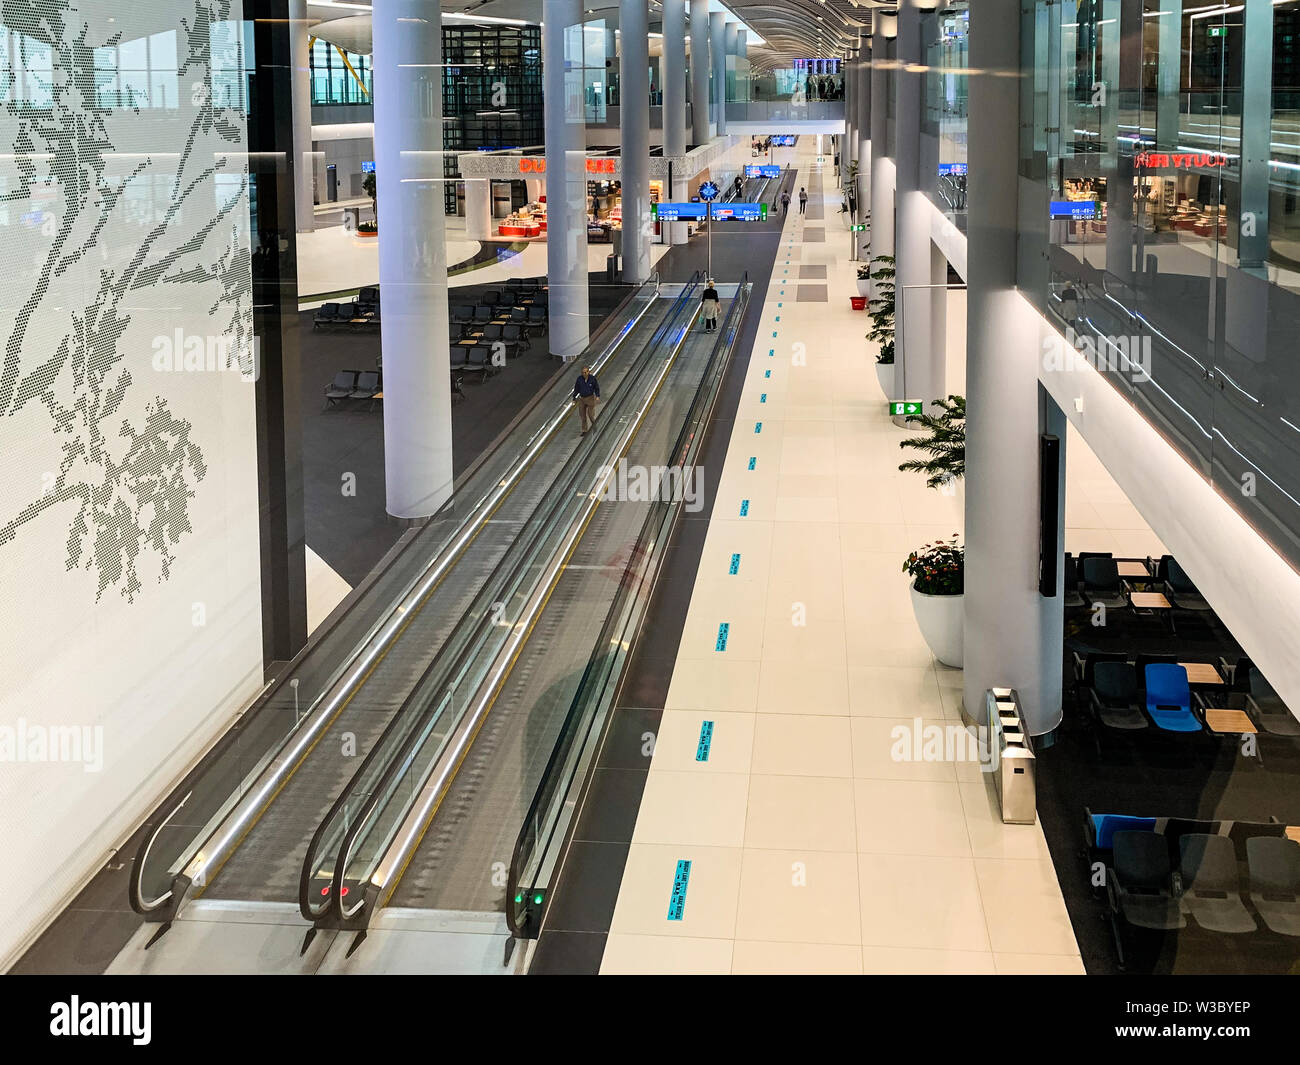 Interior design of the New Airport (IST) that freshly opened and replaces Ataturk International Airport. Istanbul/ Turkey - April 2019. Stock Photo